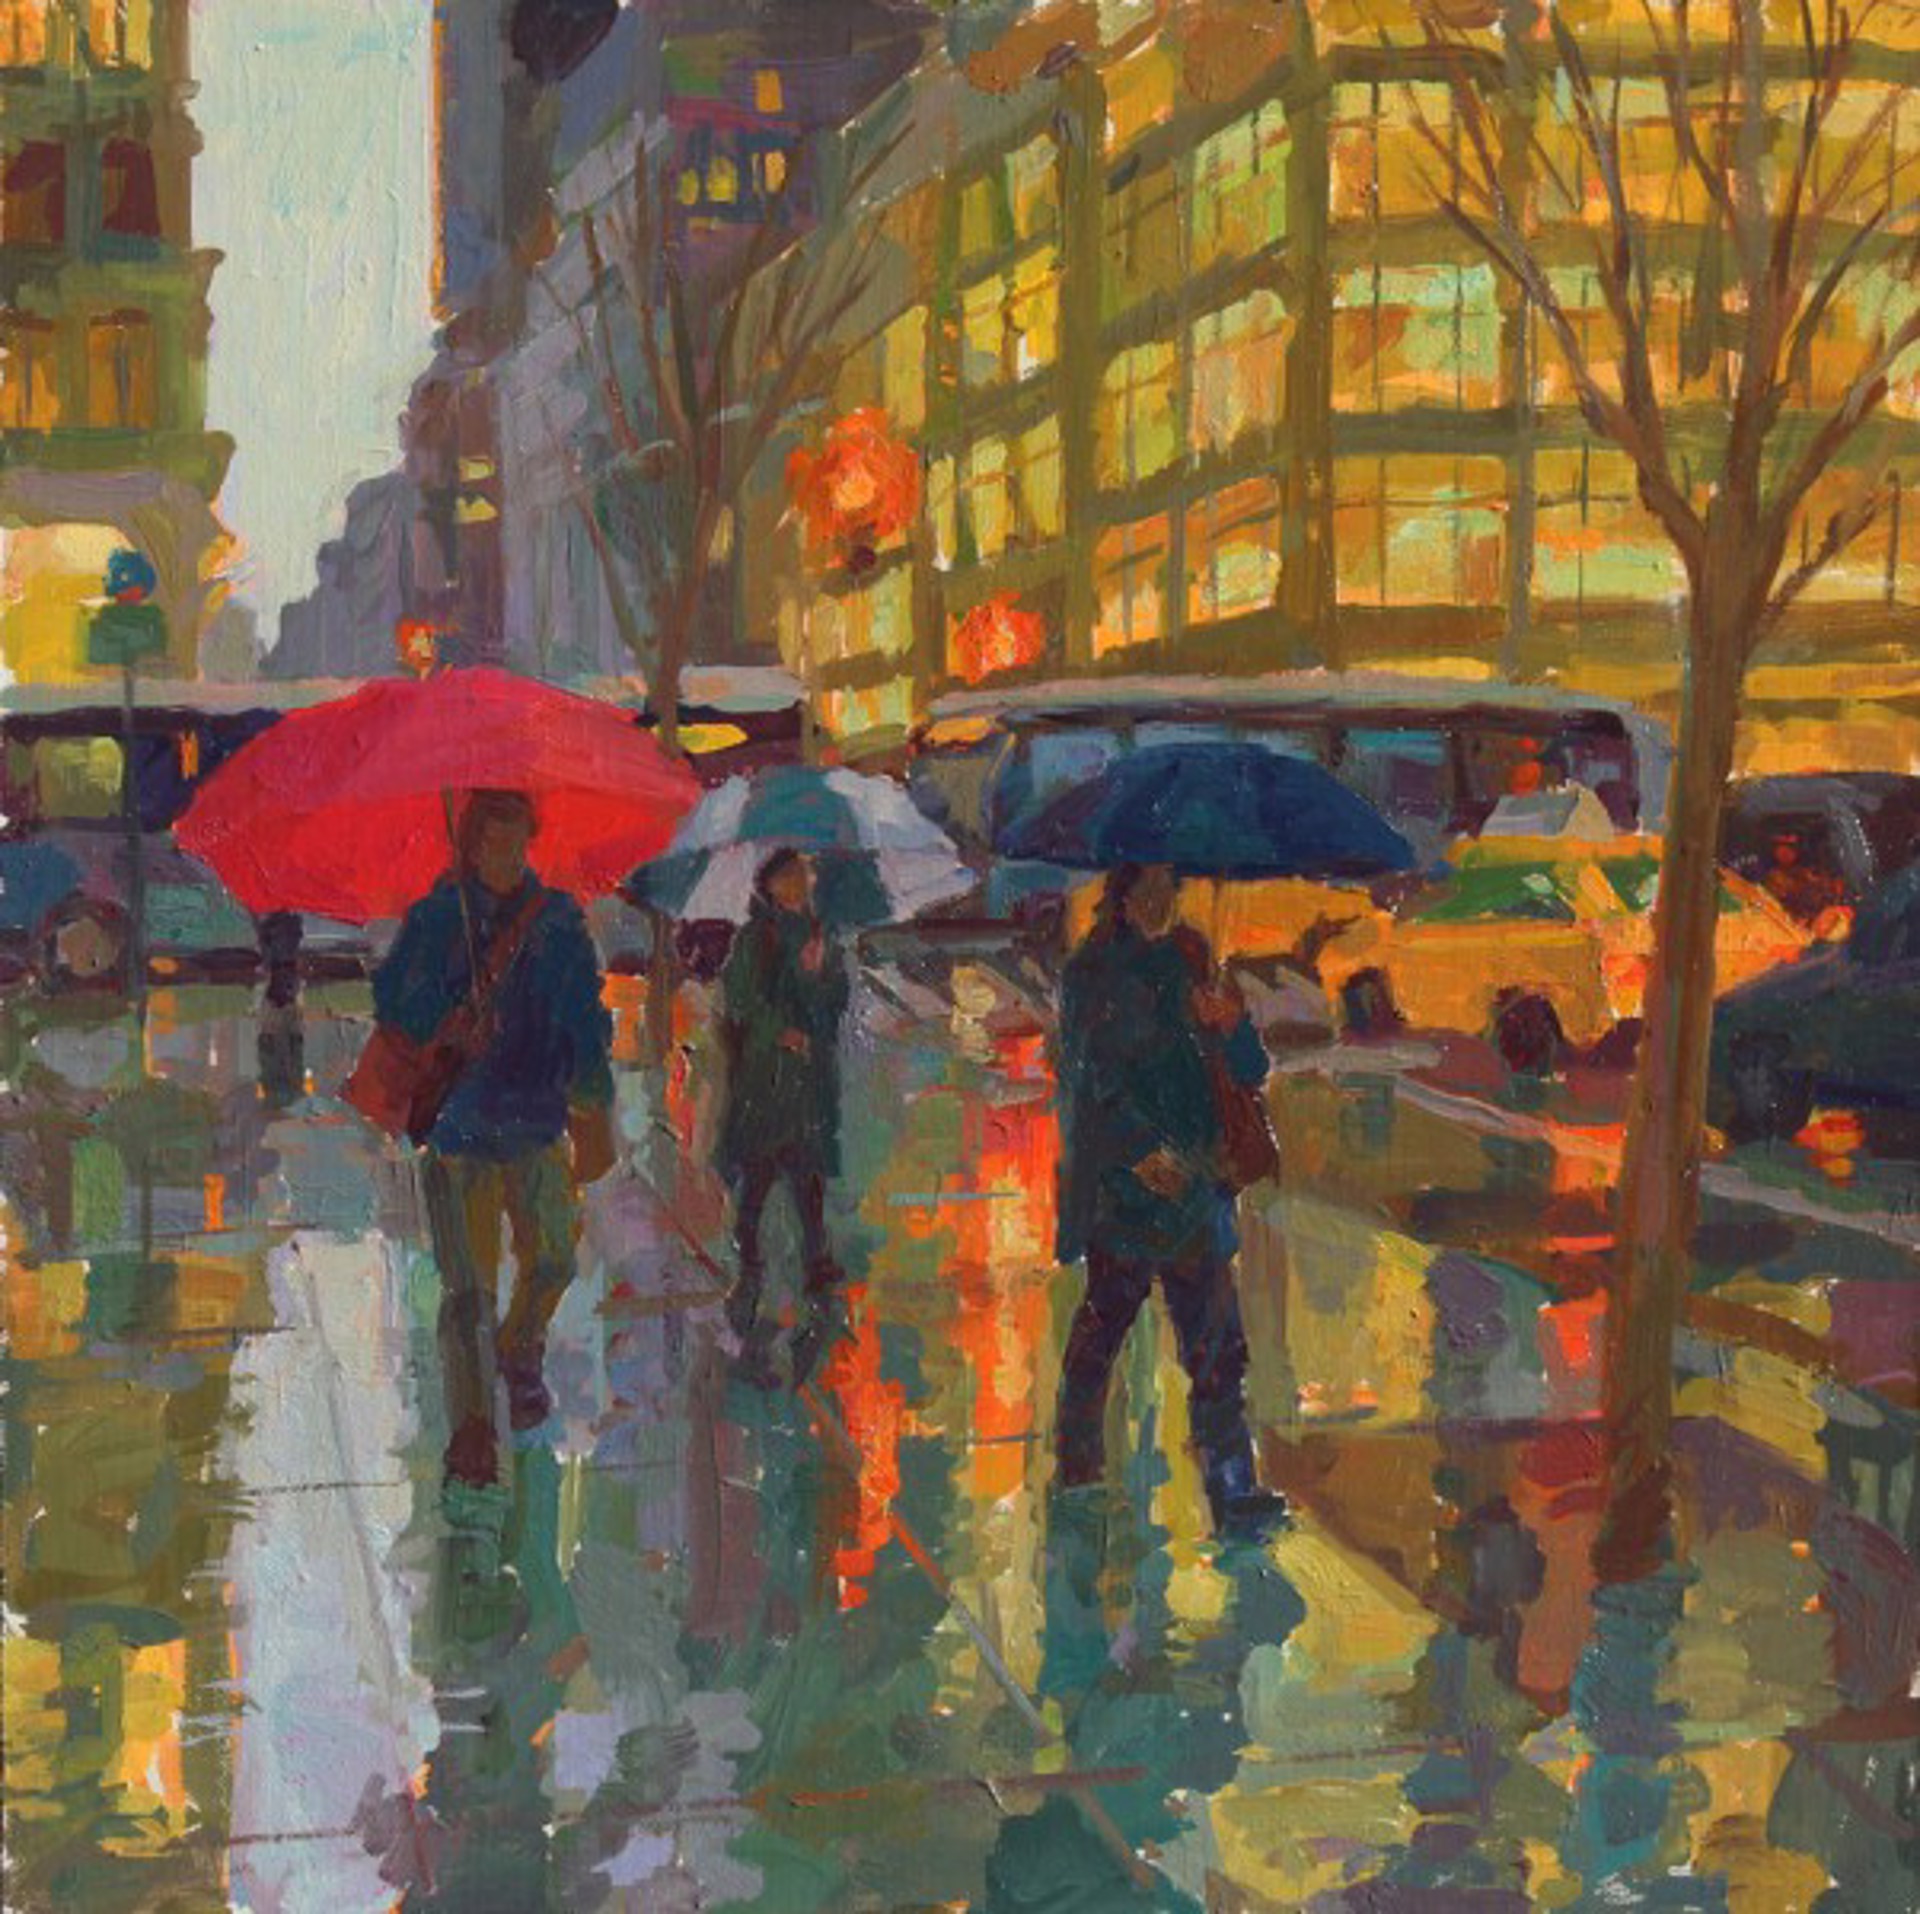 Rain Poured on City Streets by Simie Maryles